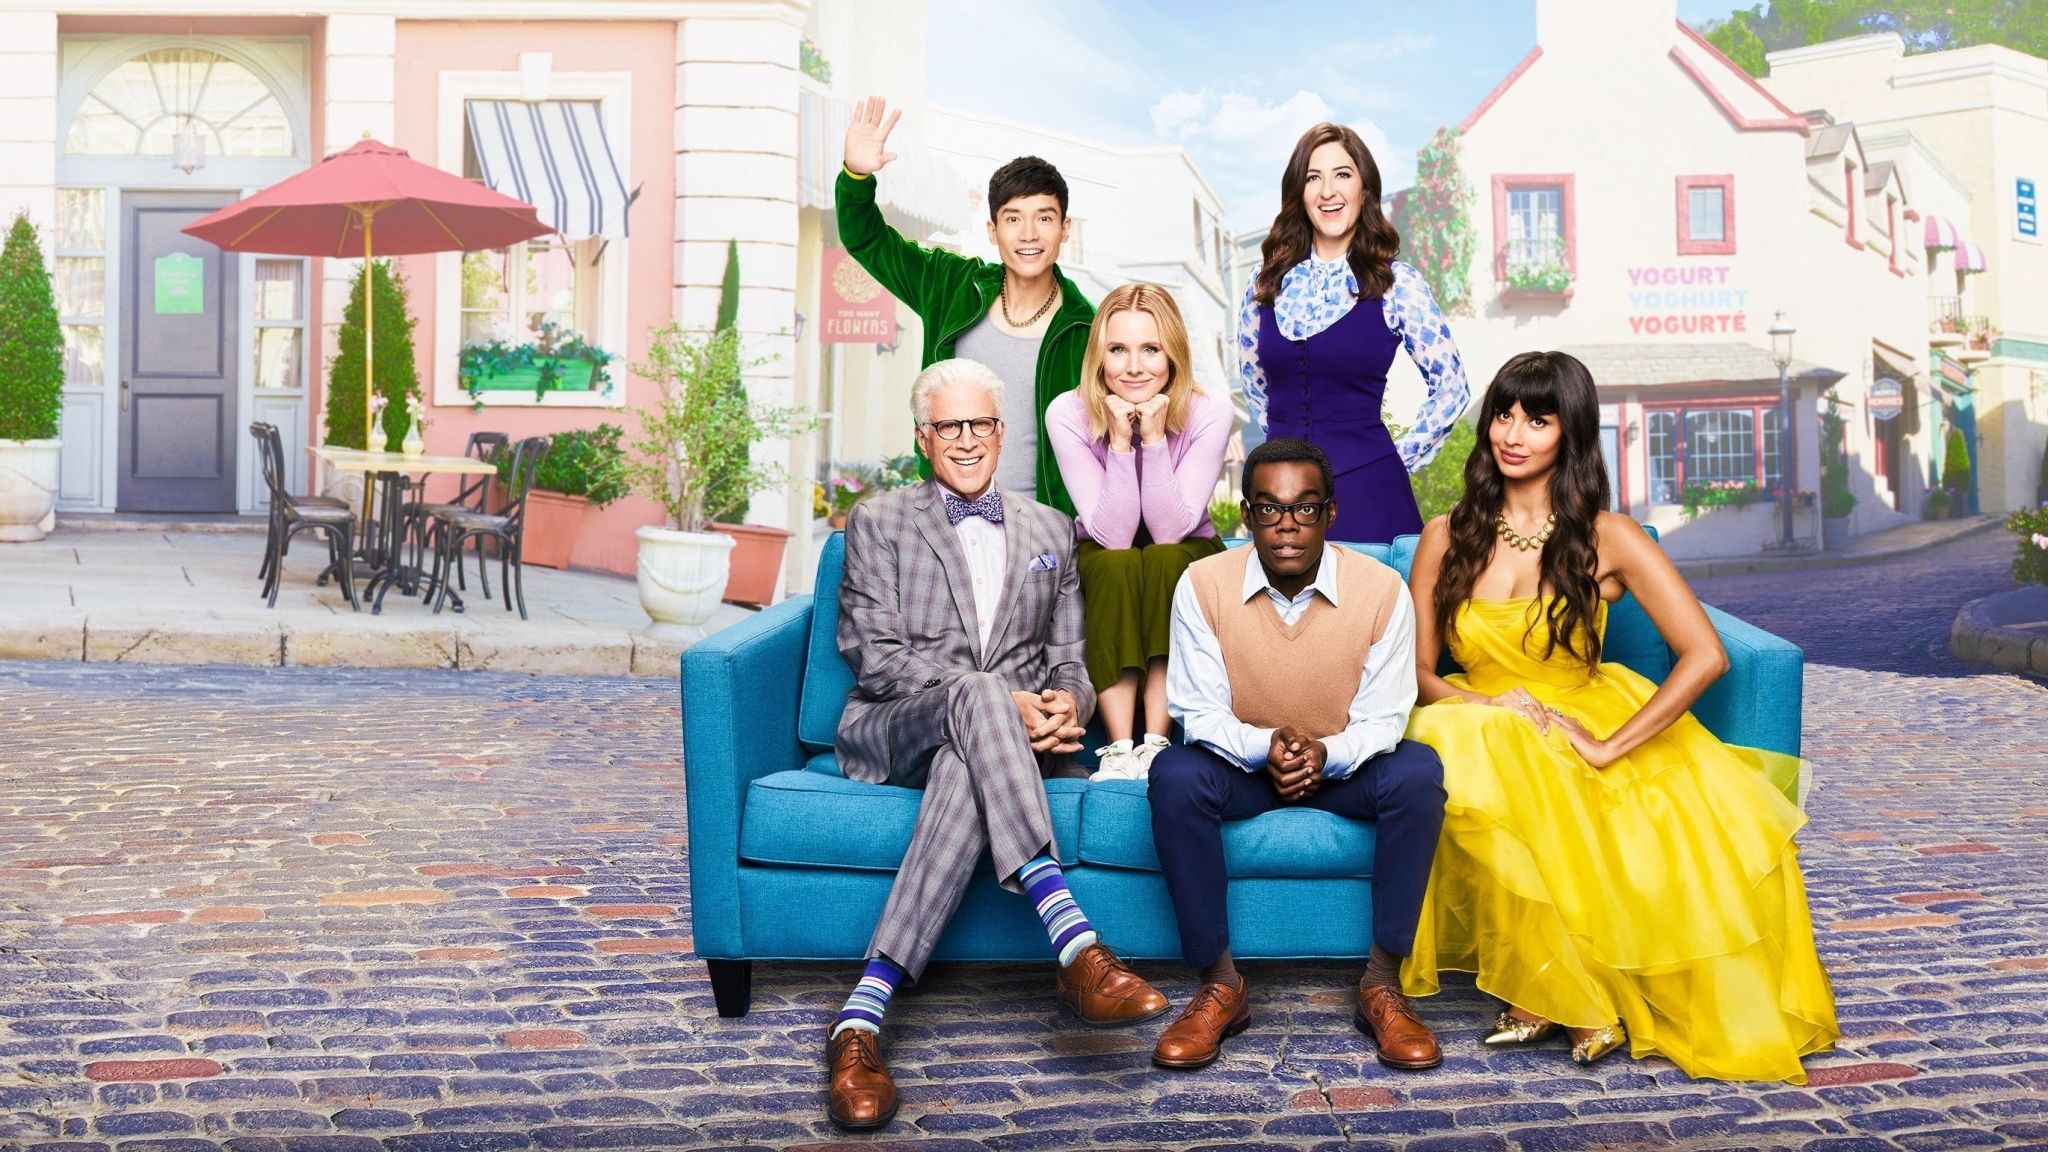 2048x1152 The Good Place 2048x1152 Resolution Wallpaper Hd